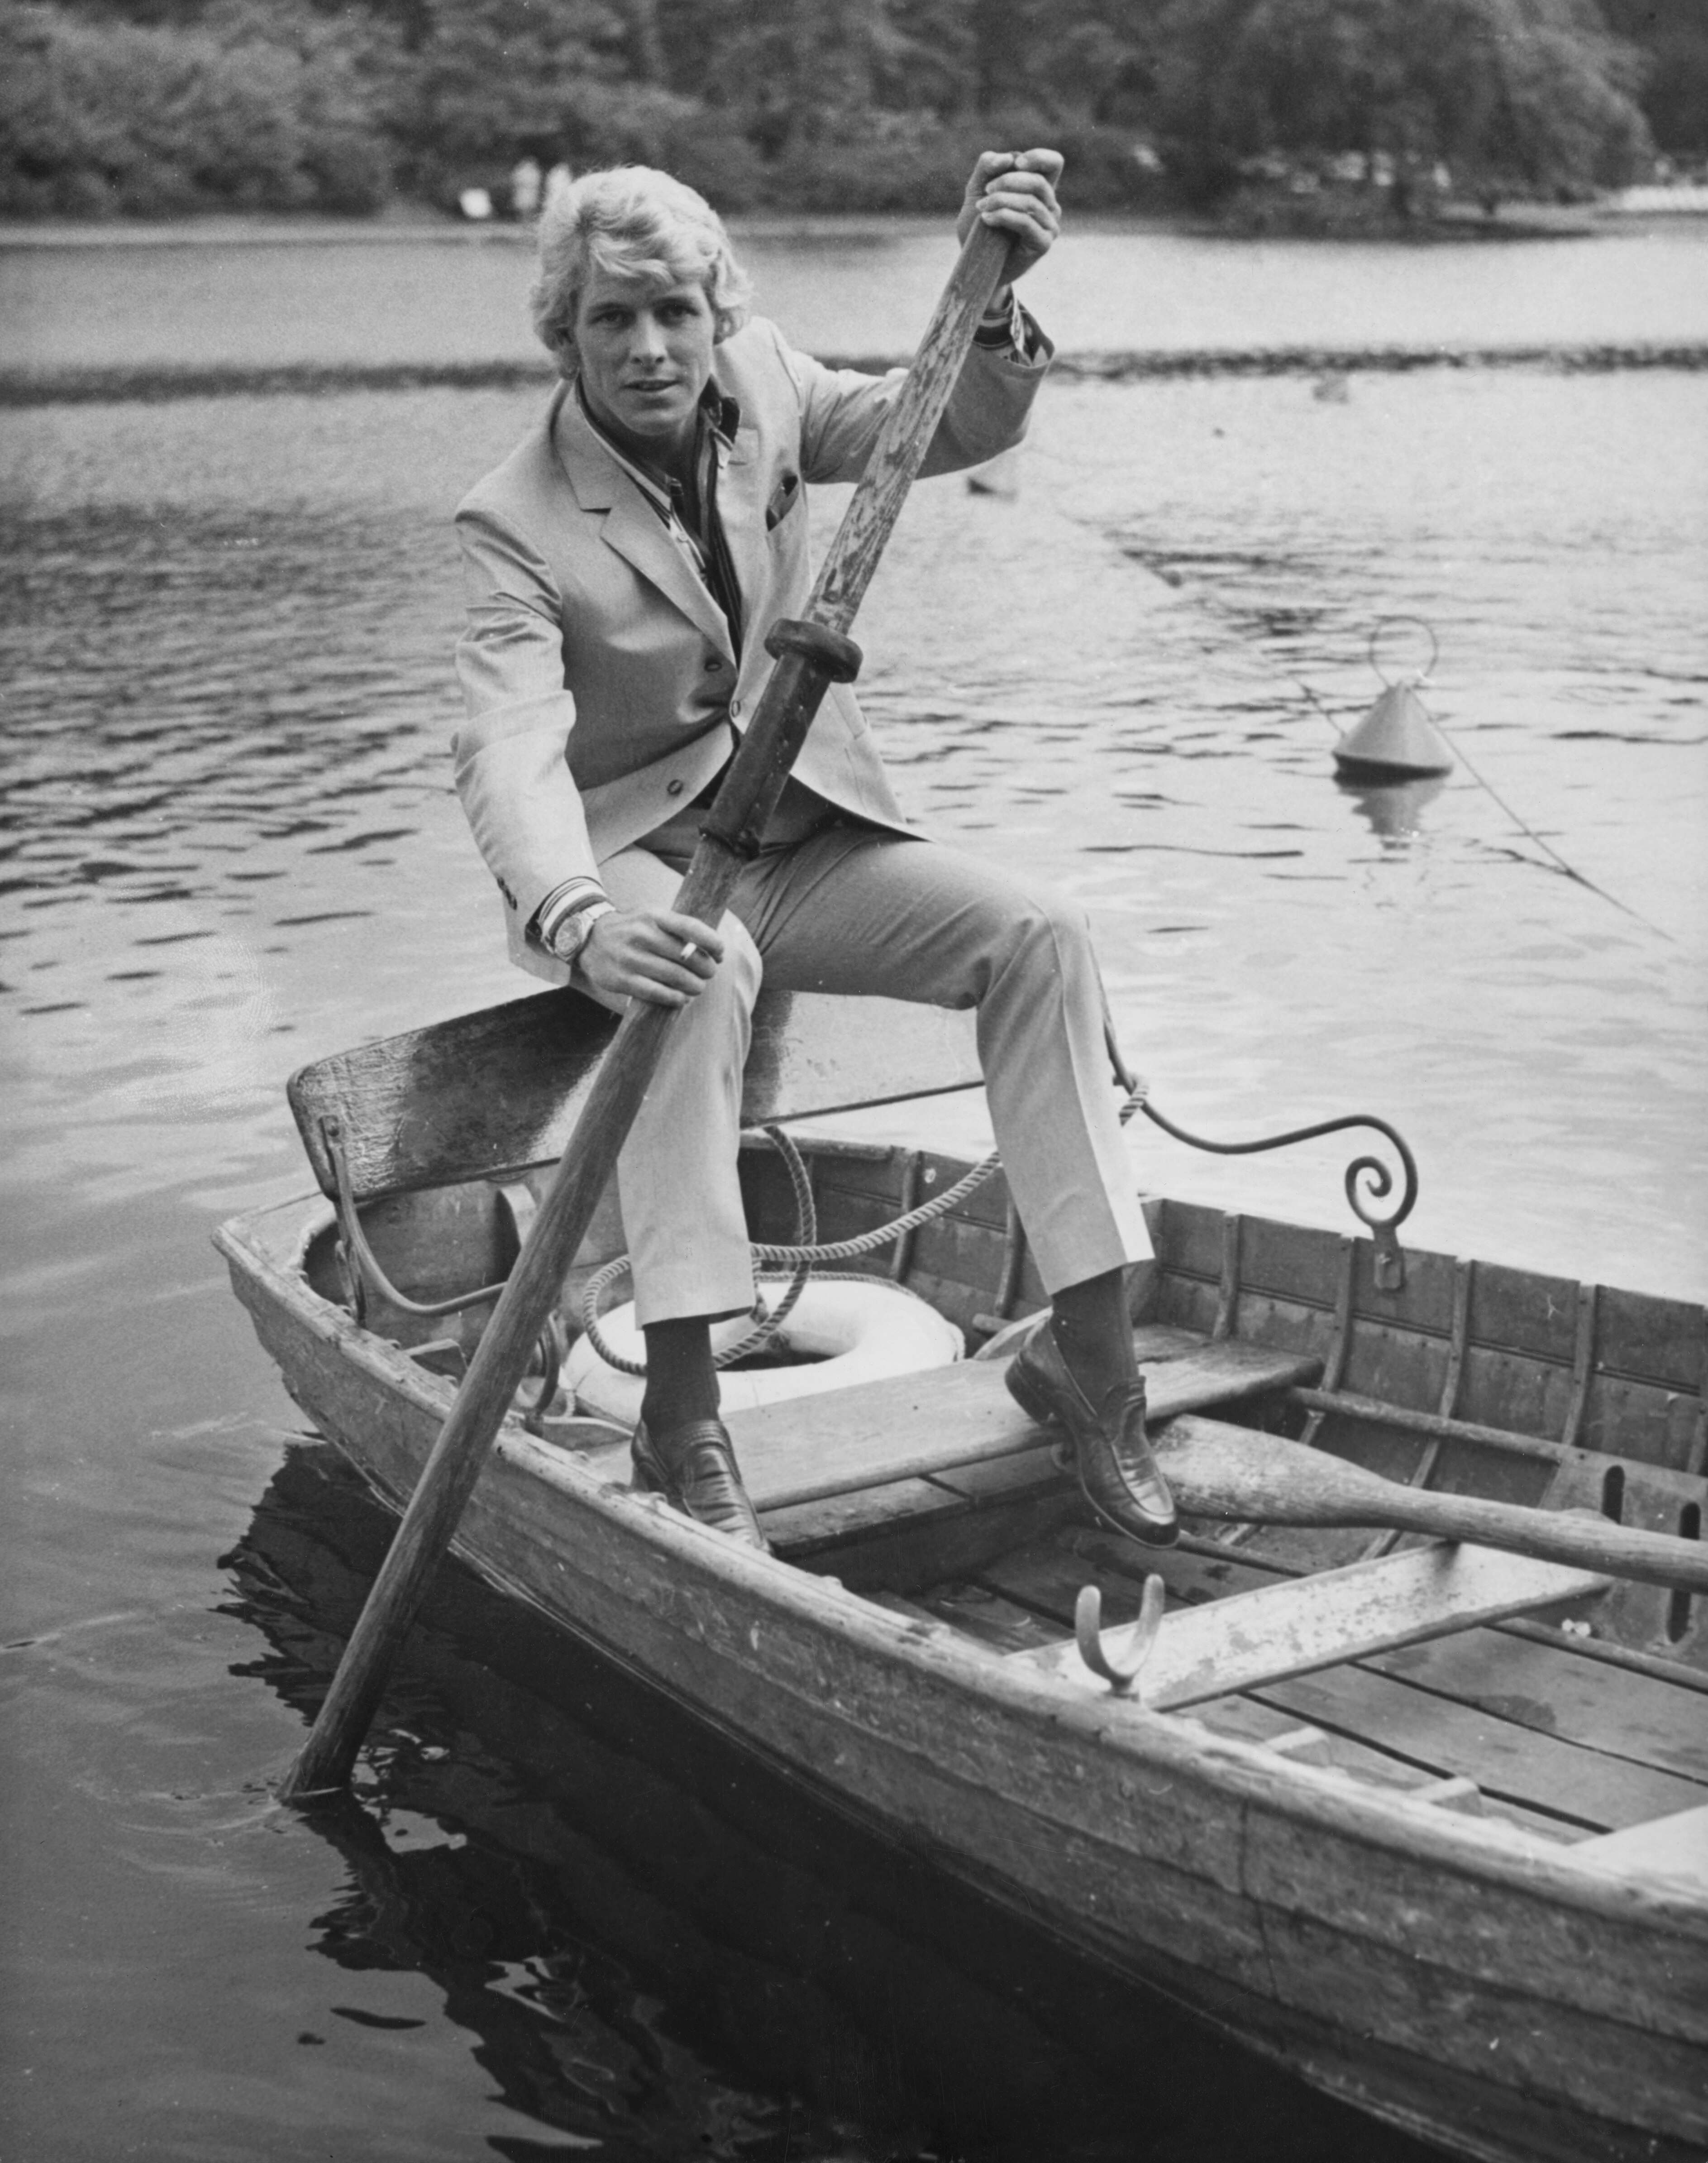 Black and white photo of Tony Bonner in a 70s style suit, rowing a boat on a lake